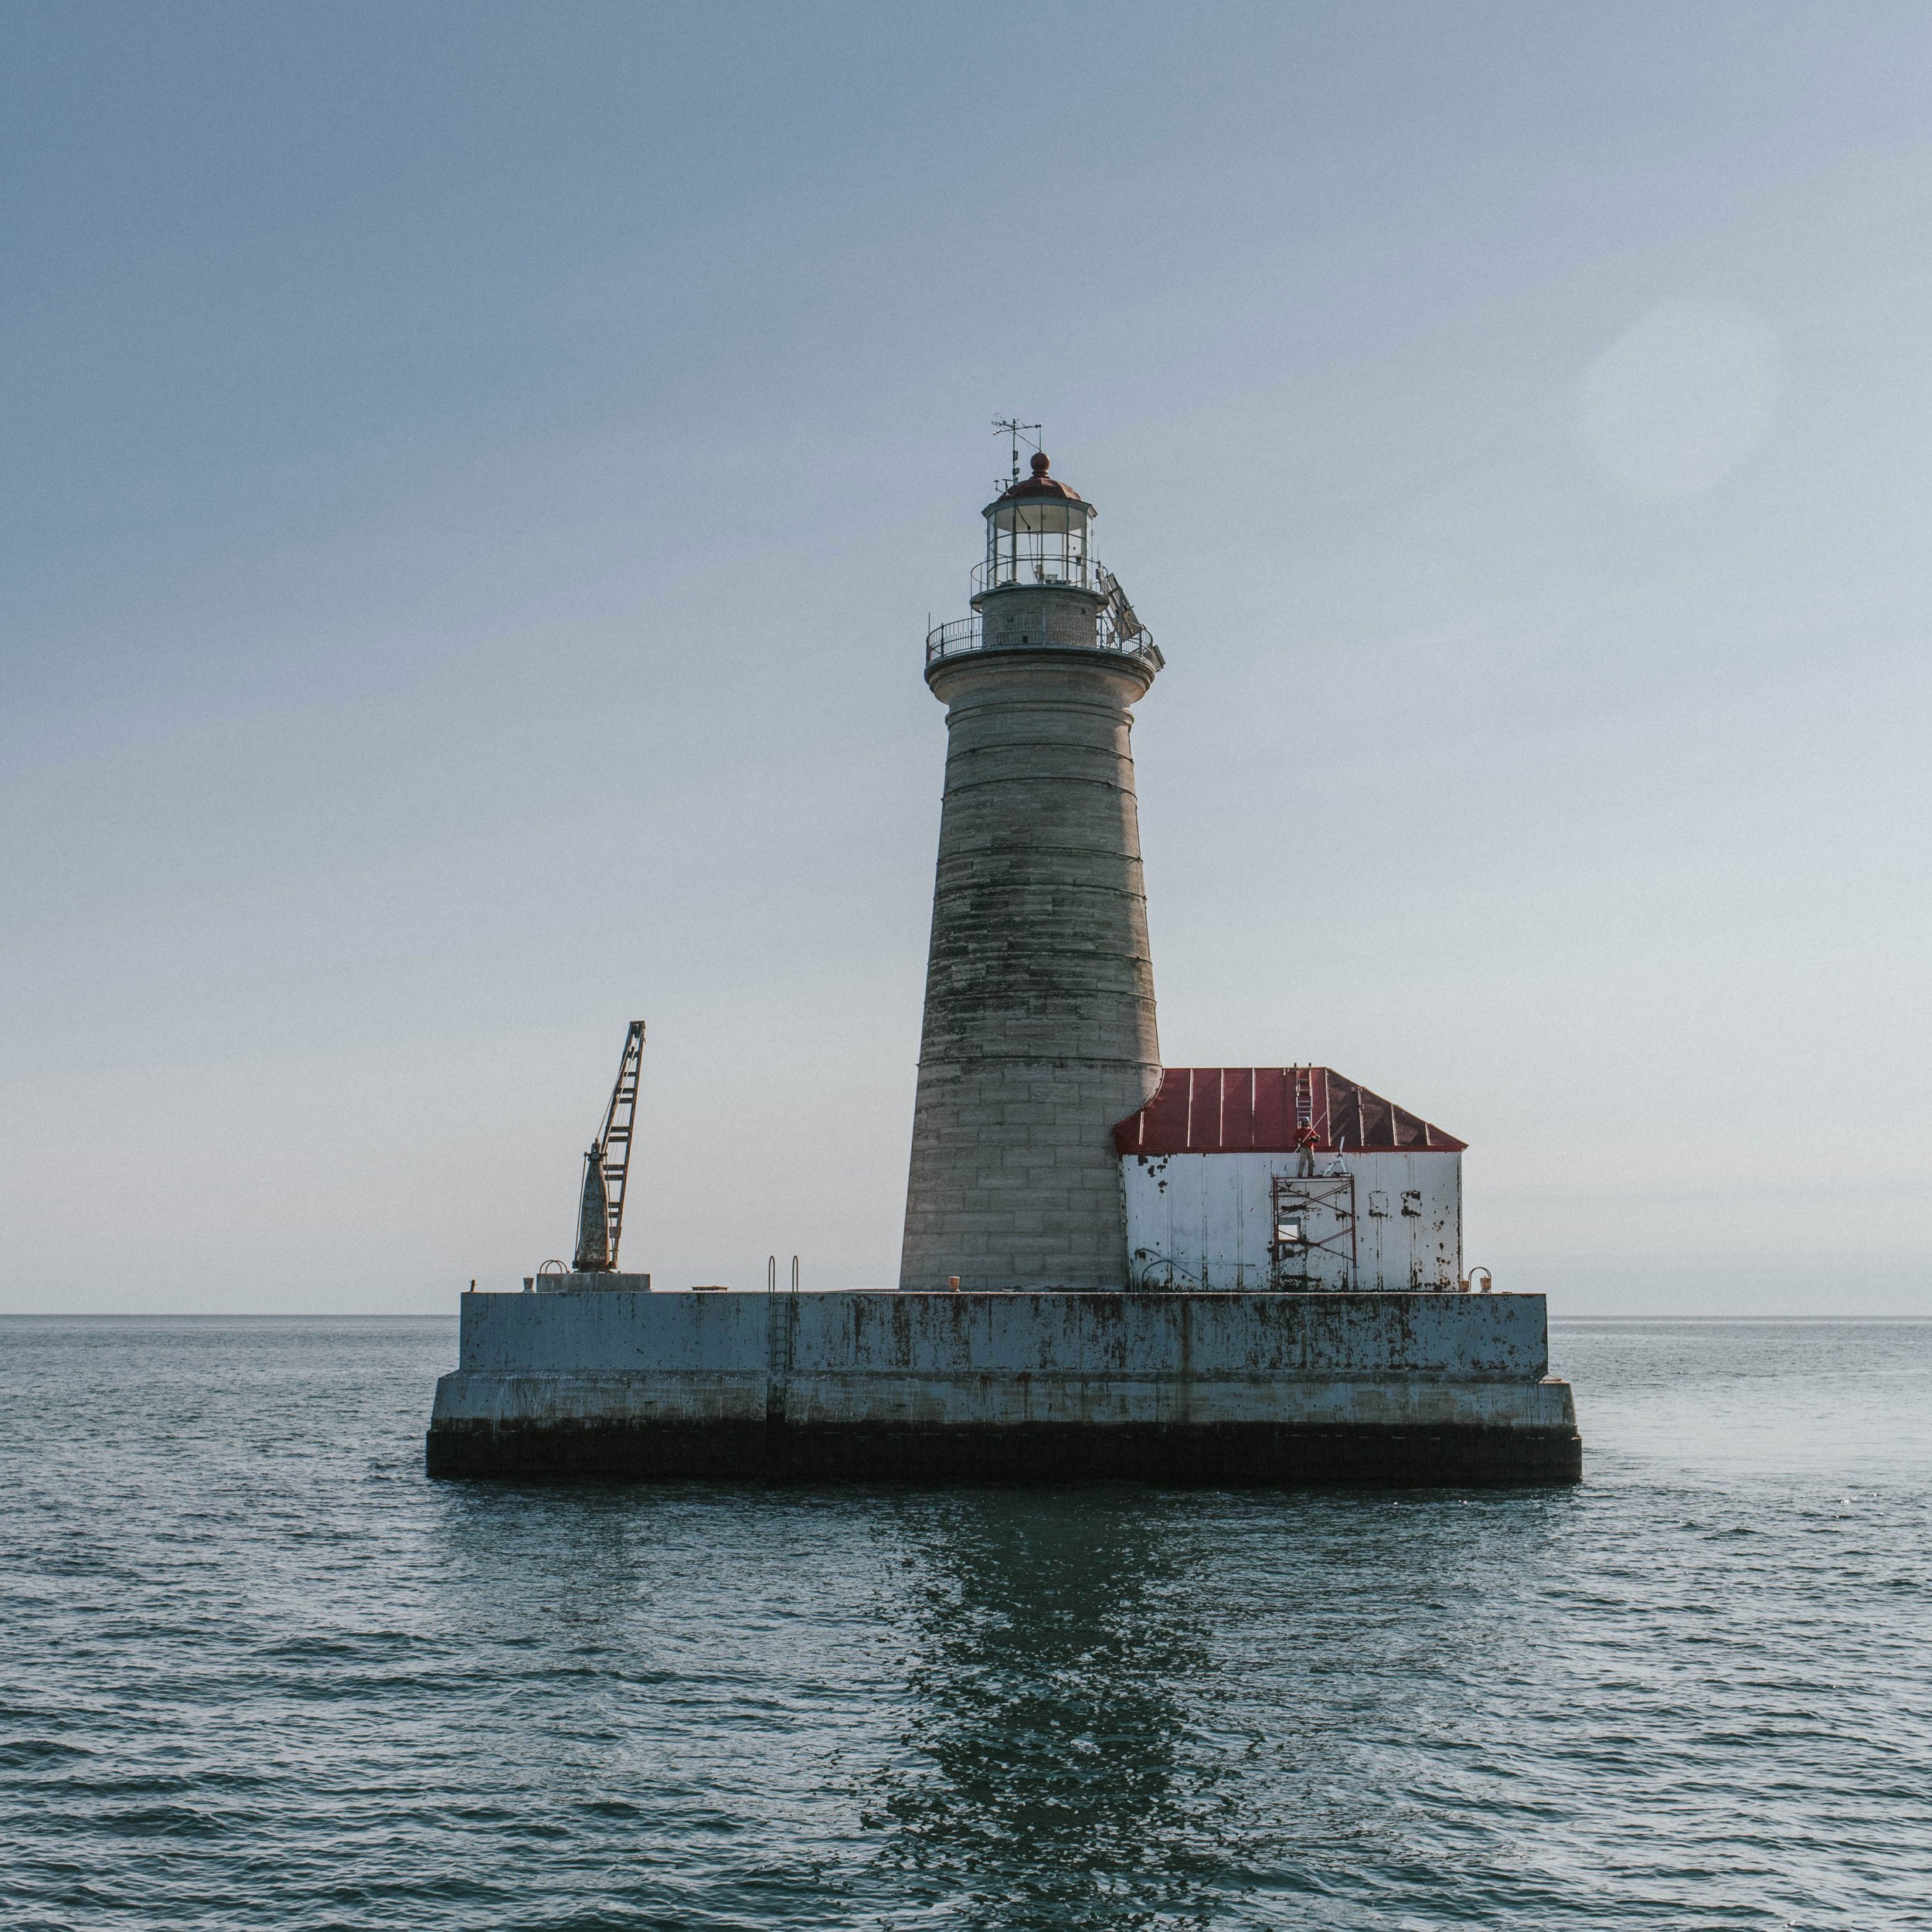 Spectacle Reef Light